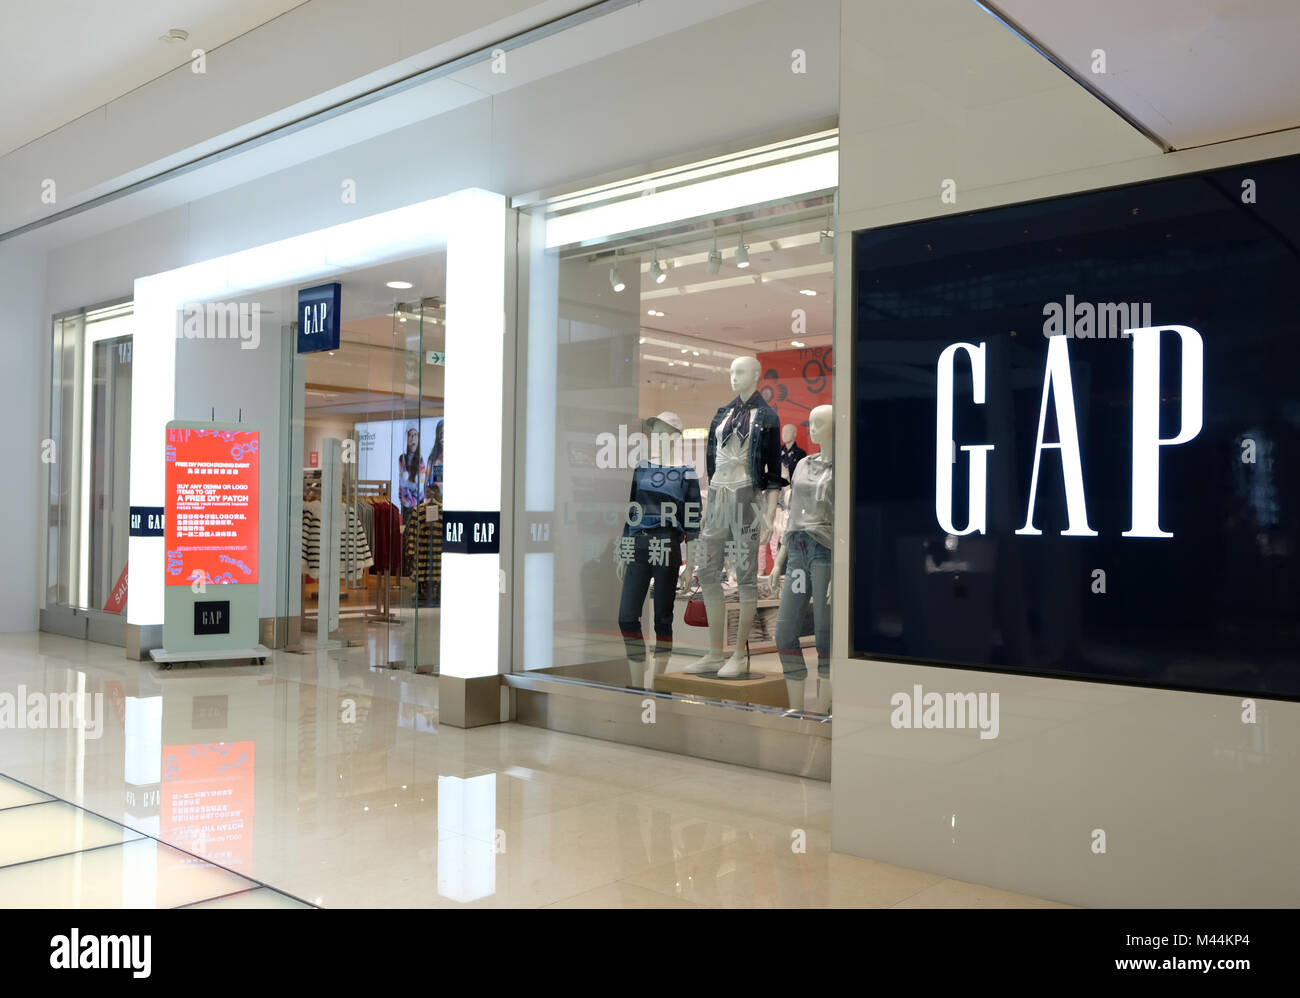 HONG KONG - FEBRUARY 4, 2018: Gap store in Hong Kong. Gap is an American multinational clothing and accessories retailer. Stock Photo